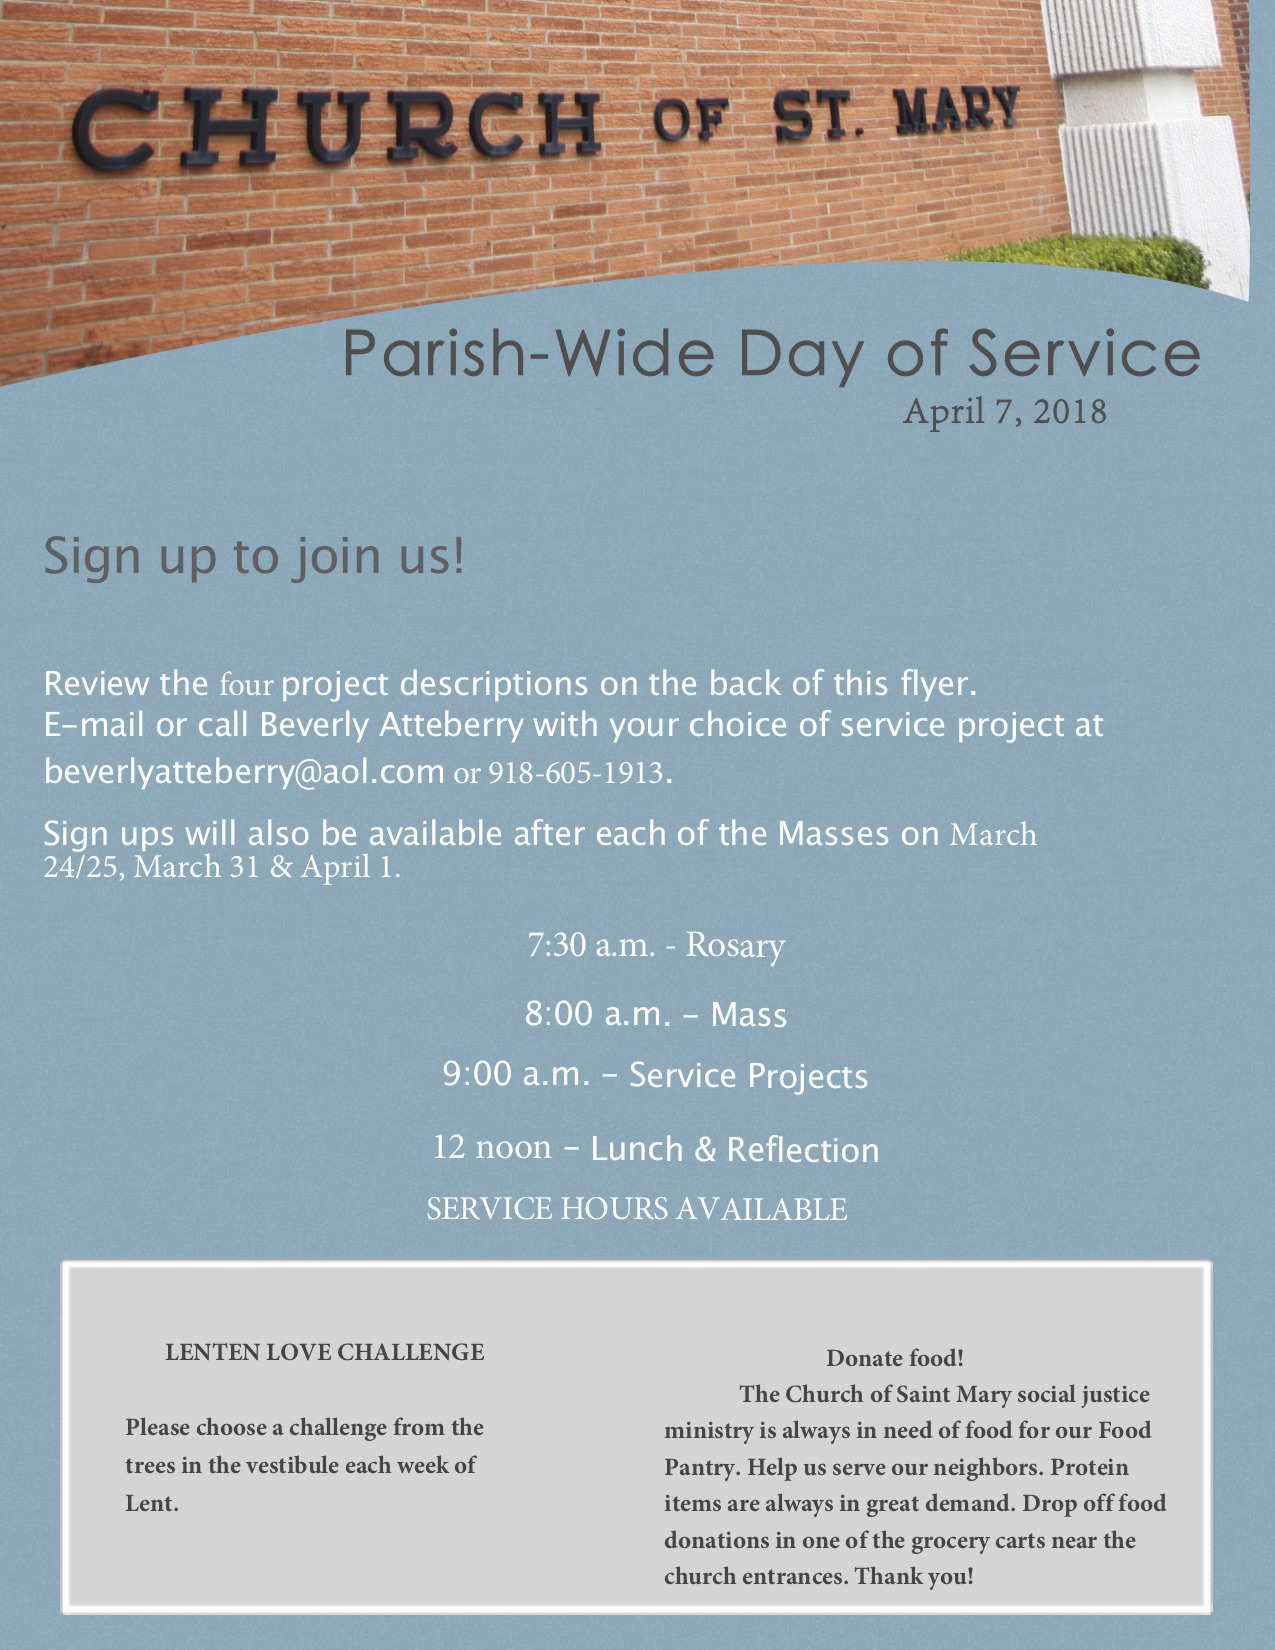 April 7, 2018 Day of Service – CHURCH OF SAINT MARY